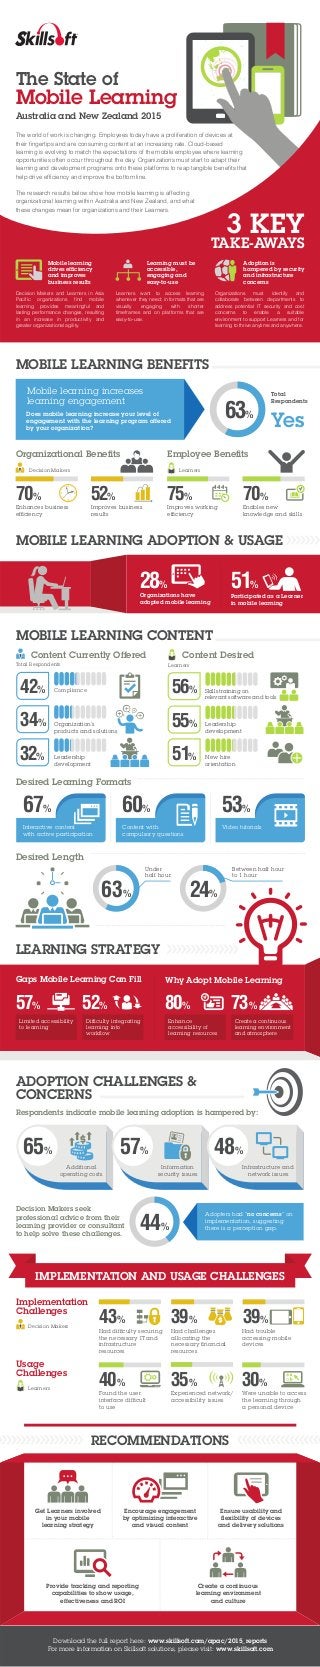 LEARNING STRATEGY
Why Adopt Mobile Learning
80%
Enhance
accessibility of
learning resources
73%
Create a continuous
learning environment
and atmosphere
Gaps Mobile Learning Can Fill
52%
Difﬁculty integrating
learning into
workﬂow
57%
Limited accessibility
to learning
MOBILE LEARNING ADOPTION & USAGE
51%
Participated as a Learner
in mobile learning
28%
Organizations have
adopted mobile learning
IMPLEMENTATION AND USAGE CHALLENGES
Learners
Usage
Challenges
Were unable to access
the learning through
a personal device
30%
Found the user
interface difﬁcult
to use
40%
Experienced network/
accessibility issues
35%
Implementation
Challenges
Decision Makers
Had difﬁculty securing
the necessary IT and
infrastructure
resources
43%
Had challenges
allocating the
necessary ﬁnancial
resources
39%
Had trouble
accessing mobile
devices
39%
MOBILE LEARNING BENEFITS
Does mobile learning increase your level of
engagement with the learning program offered
by your organization?
Mobile learning increases
learning engagement
63%
Total
Respondents
Yes
Organizational Beneﬁts
Decision Makers
Improves business
results
52%
Enhances business
efﬁciency
70%
Learners
Employee Beneﬁts
Improves working
efﬁciency
75%
Enables new
knowledge and skills
70%
Interactive content
with active participation
67% 60%
Content with
compulsory questions
Video tutorials
53%
Desired Learning Formats
ADOPTION CHALLENGES &
CONCERNS
Respondents indicate mobile learning adoption is hampered by:
44%
Decision Makers seek
professional advice from their
learning provider or consultant
to help solve these challenges.
Adopters had “no concerns” on
implementation, suggesting
there is a perception gap.
Additional
operating costs
65%
Information
security issues
57%
Infrastructure and
network issues
48%
Desired Length
Under
half hour
Between half hour
to 1 hour
63% 24%
Download the full report here: www.skillsoft.com/apac/2015_reports
For more information on Skillsoft solutions, please visit: www.skillsoft.com
RECOMMENDATIONS
Encourage engagement
by optimizing interactive
and visual content
Provide tracking and reporting
capabilities to show usage,
effectiveness and ROI
Get Learners involved
in your mobile
learning strategy
Create a continuous
learning environment
and culture
Ensure usability and
ﬂexibility of devices
and delivery solutions
3 KEY
TAKE-AWAYS
Mobile learning
drives efﬁciency
and improves
business results
Decision Makers and Learners in Asia
Pacific organizations find mobile
learning provides meaningful and
lasting performance changes, resulting
in an increase in productivity and
greater organizational agility.
Learning must be
accessible,
engaging and
easy-to-use
Learners want to access learning
whenever they need; in formats that are
visually engaging with shorter
timeframes and on platforms that are
easy-to-use.
Adoption is
hampered by security
and infrastructure
concerns
Organizations must identify and
collaborate between departments to
address potential IT security and cost
concerns to enable a suitable
environment to support Learners and for
learning to thrive anytime and anywhere.
The State of
Mobile Learning
Australia and New Zealand 2015
The world of work is changing. Employees today have a proliferation of devices at
their fingertips and are consuming content at an increasing rate. Cloud-based
learning is evolving to match the expectations of the mobile employee where learning
opportunities often occur throughout the day. Organizations must start to adapt their
learning and development programs onto these platforms to reap tangible benefits that
help drive efficiency and improve the bottom line.
The research results below show how mobile learning is affecting
organizational learning within Australia and New Zealand, and what
these changes mean for organizations and their Learners.
MOBILE LEARNING CONTENT
Content Currently Offered
Total Respondents
Organization’s
products and solutions
34%
Leadership
development
32%
42% Compliance
Learners
Content Desired
Leadership
development
55%
Skills training on
relevant software and tools
56%
New hire
orientation
51%
 